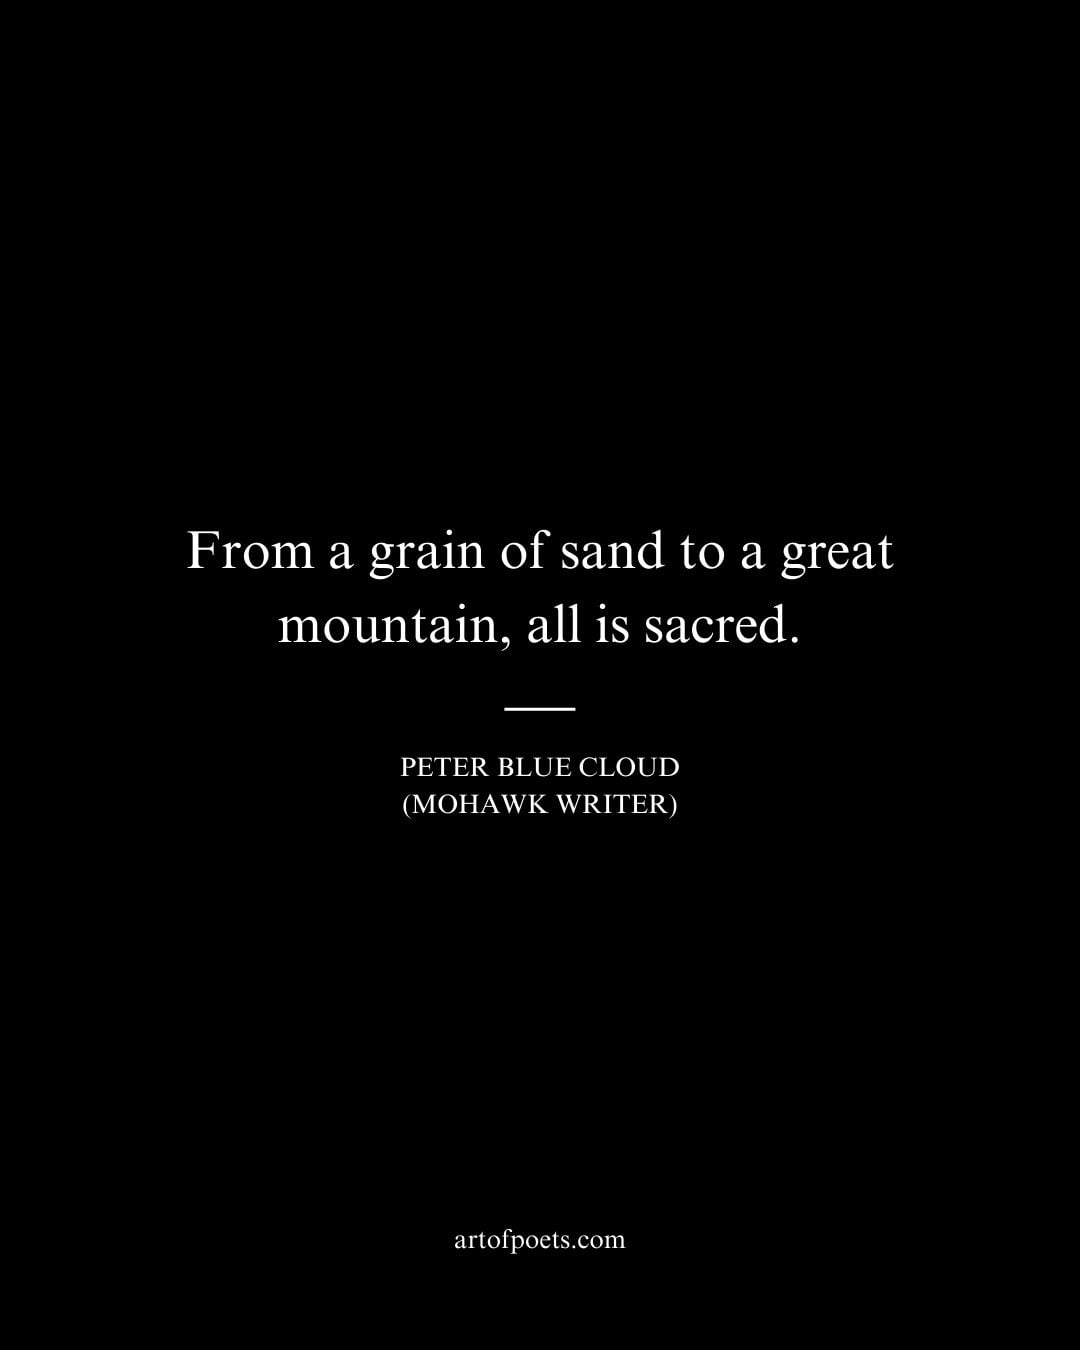 From a grain of sand to a great mountain all is sacred